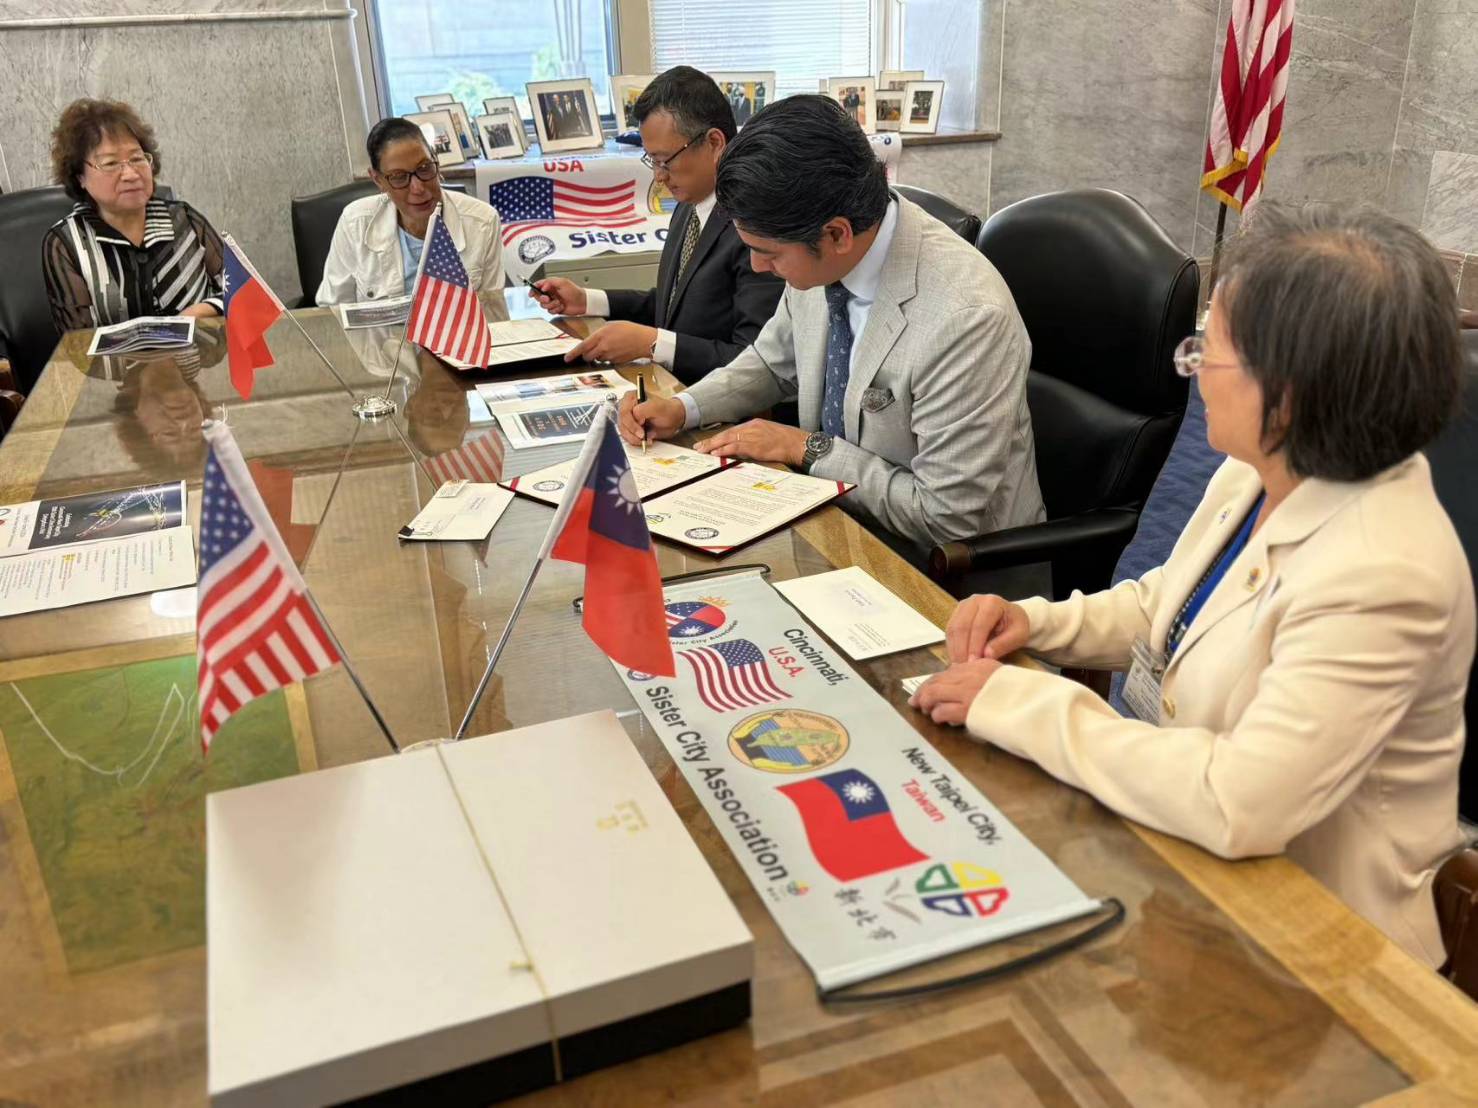 Cincinnati Mayor Aftab Pureval (second from right) signs the sister city agreement and declares the day "Taiwan Day".